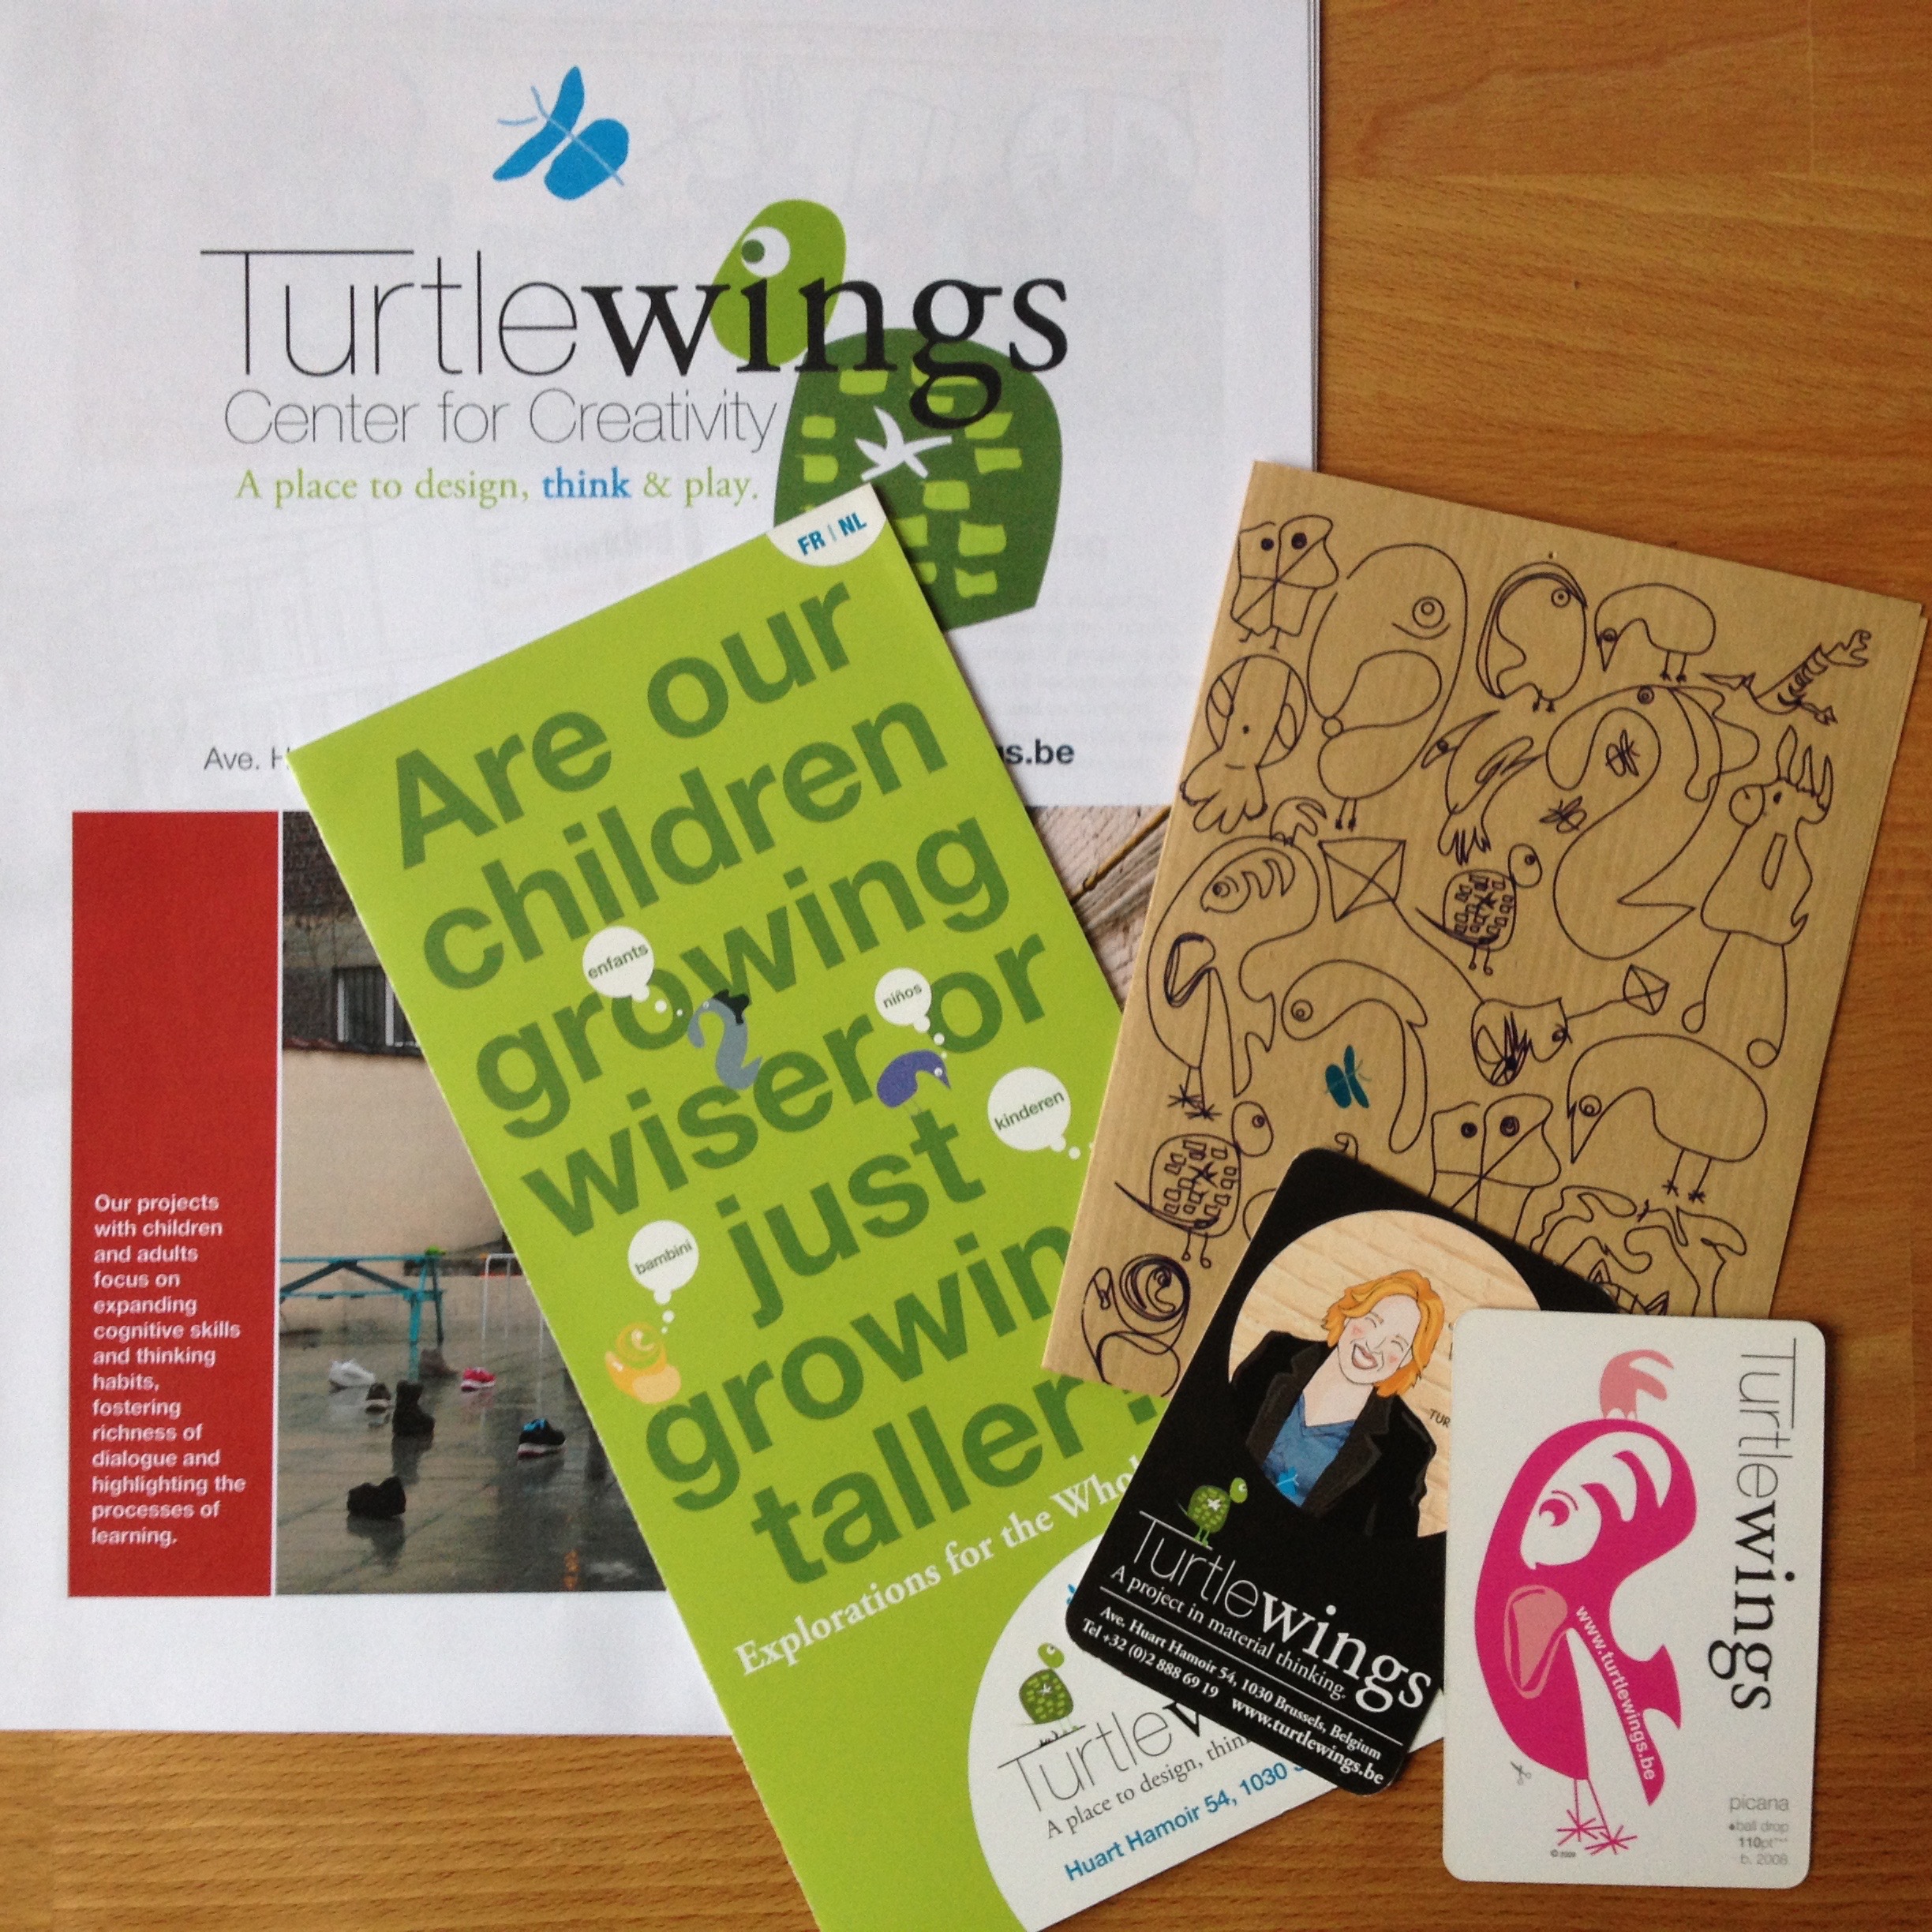 Turtlewings branding and marketing materials 2009-2014